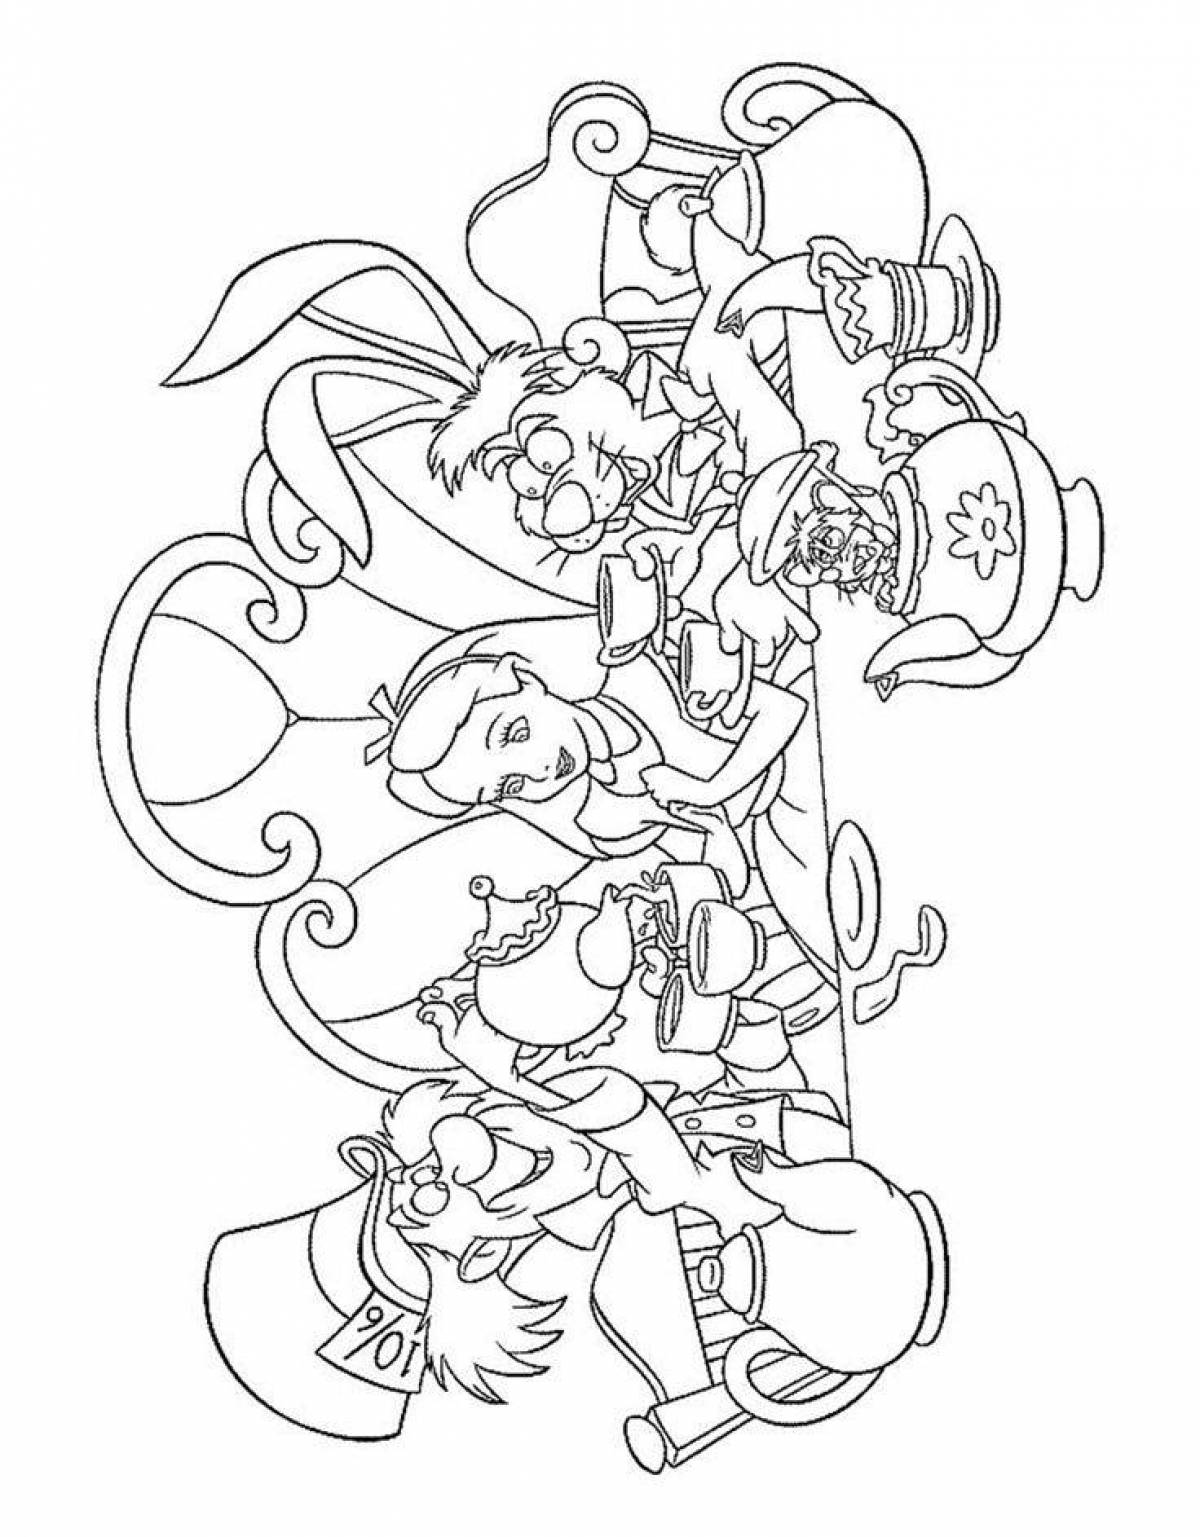 Glorious alice find coloring page